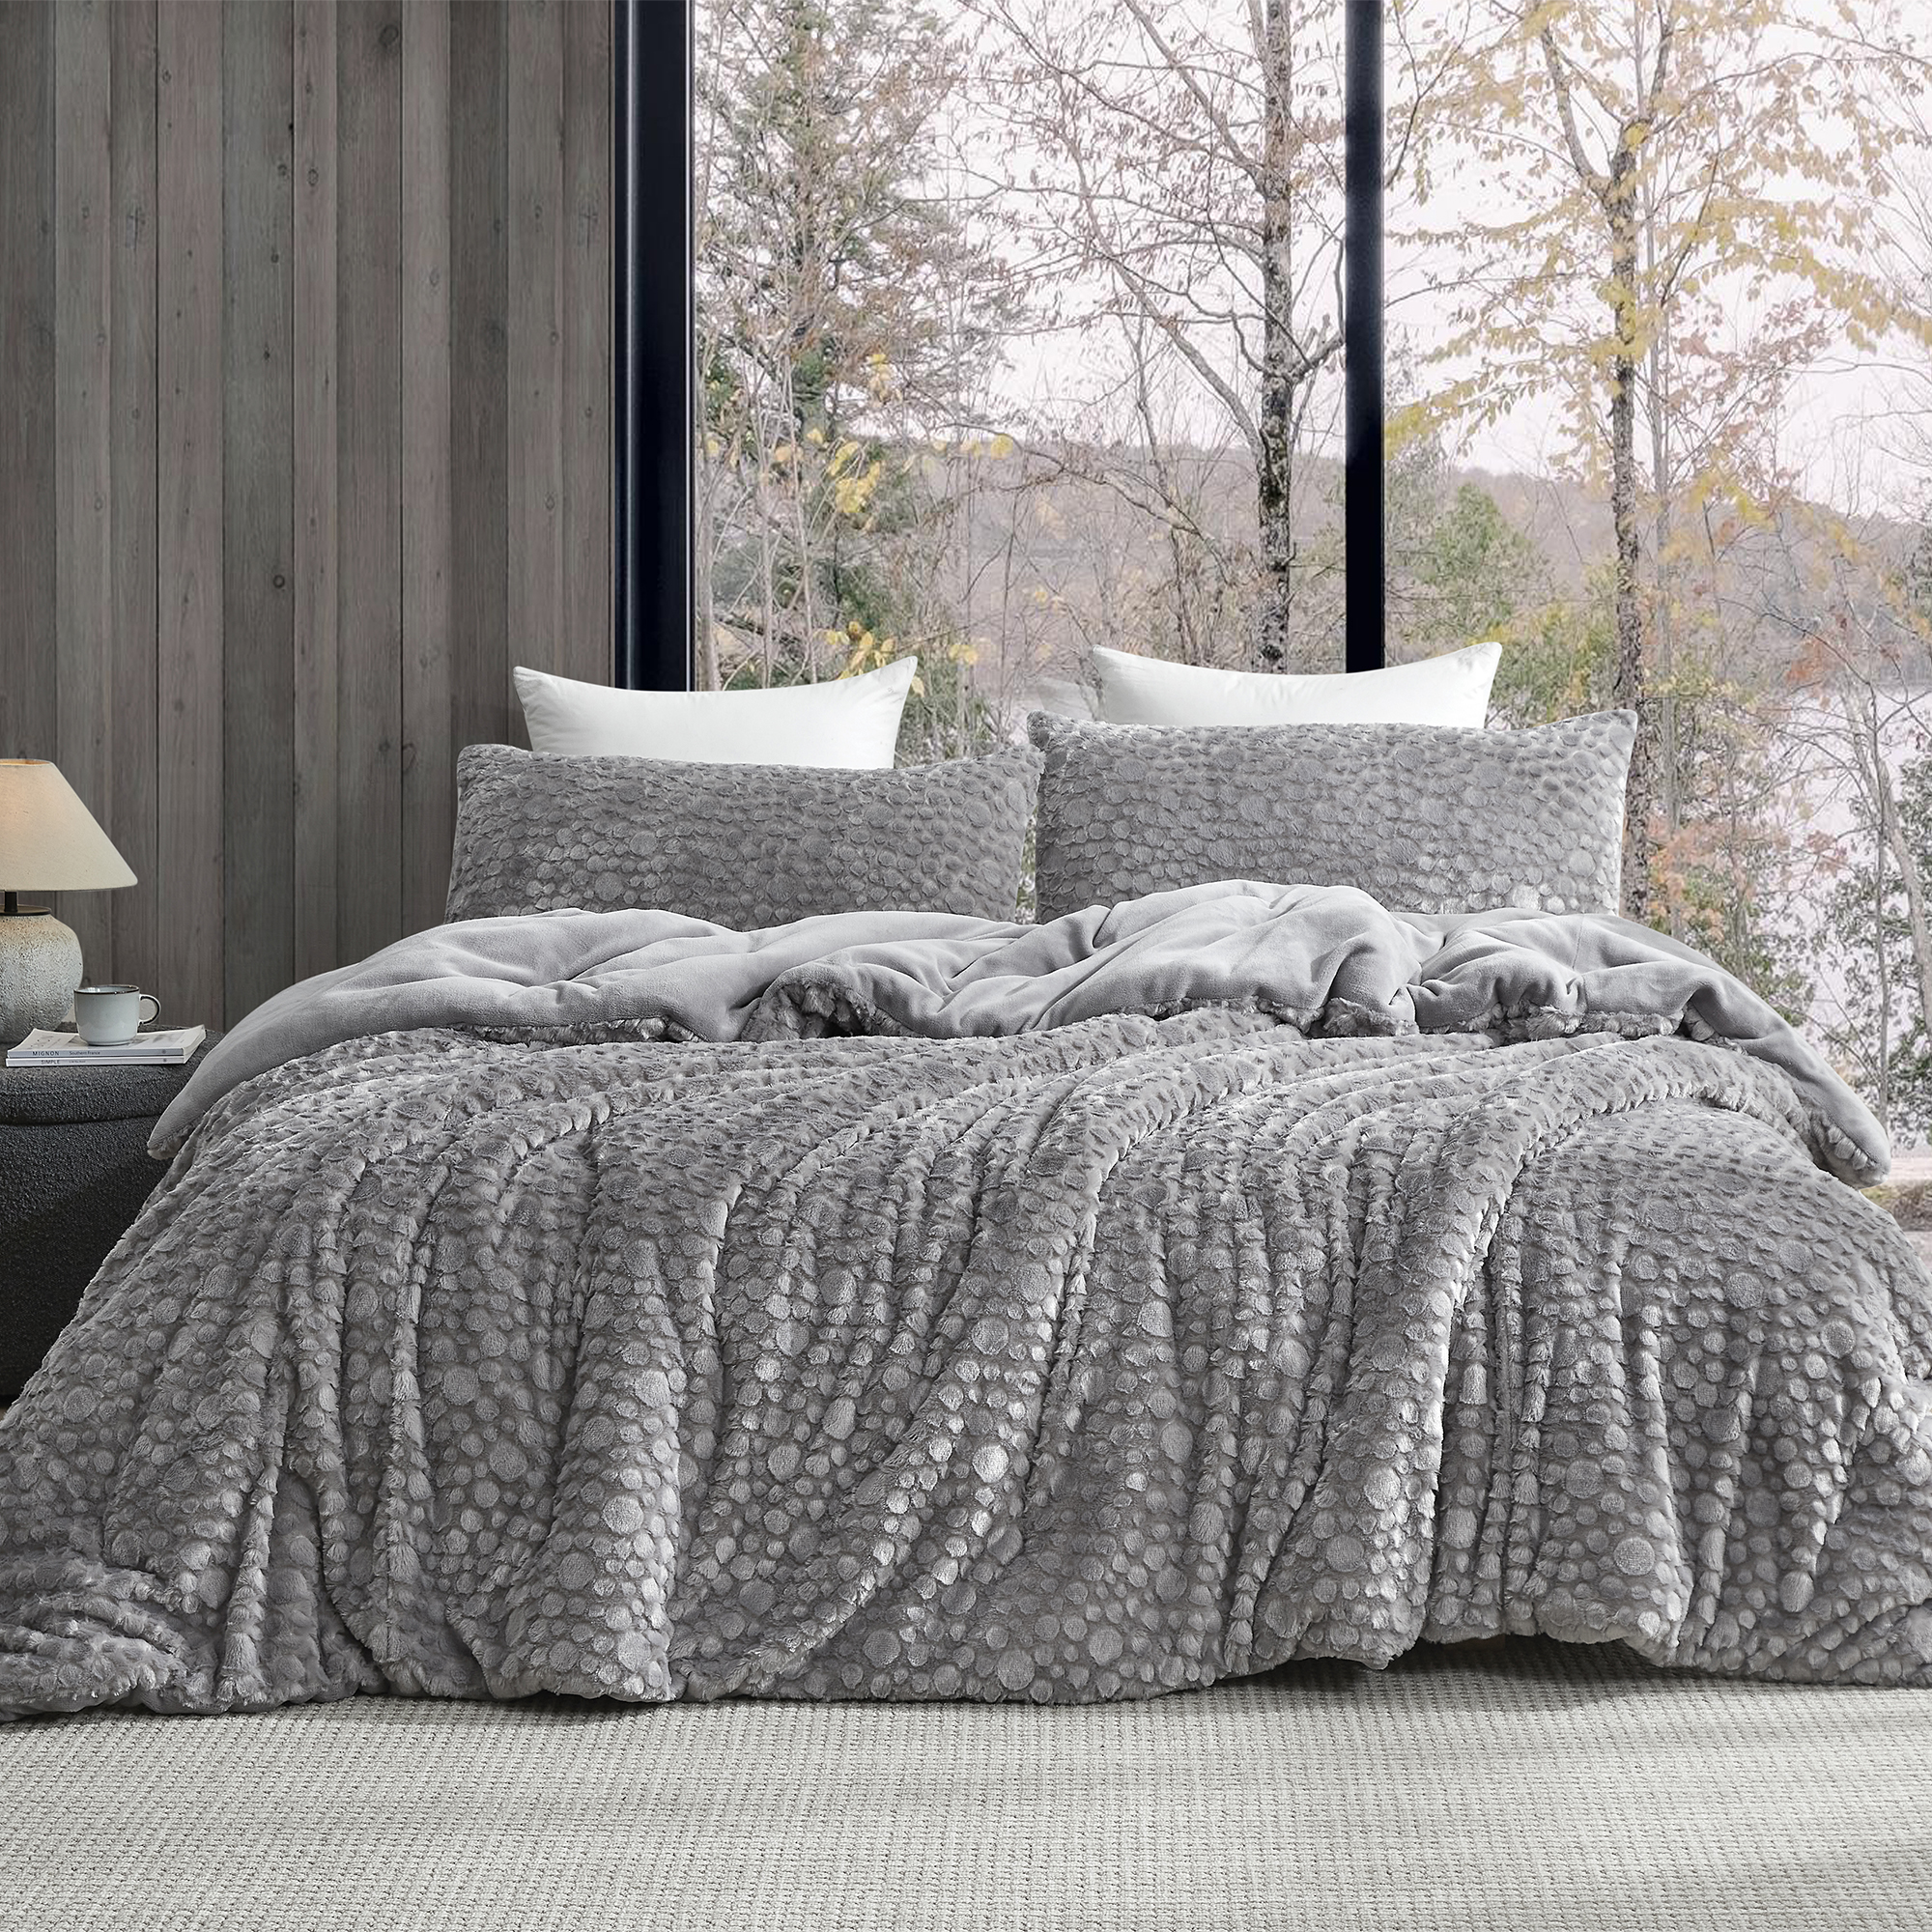 Tons of Texture - Coma Inducer® Oversized Queen Comforter - Space Gray